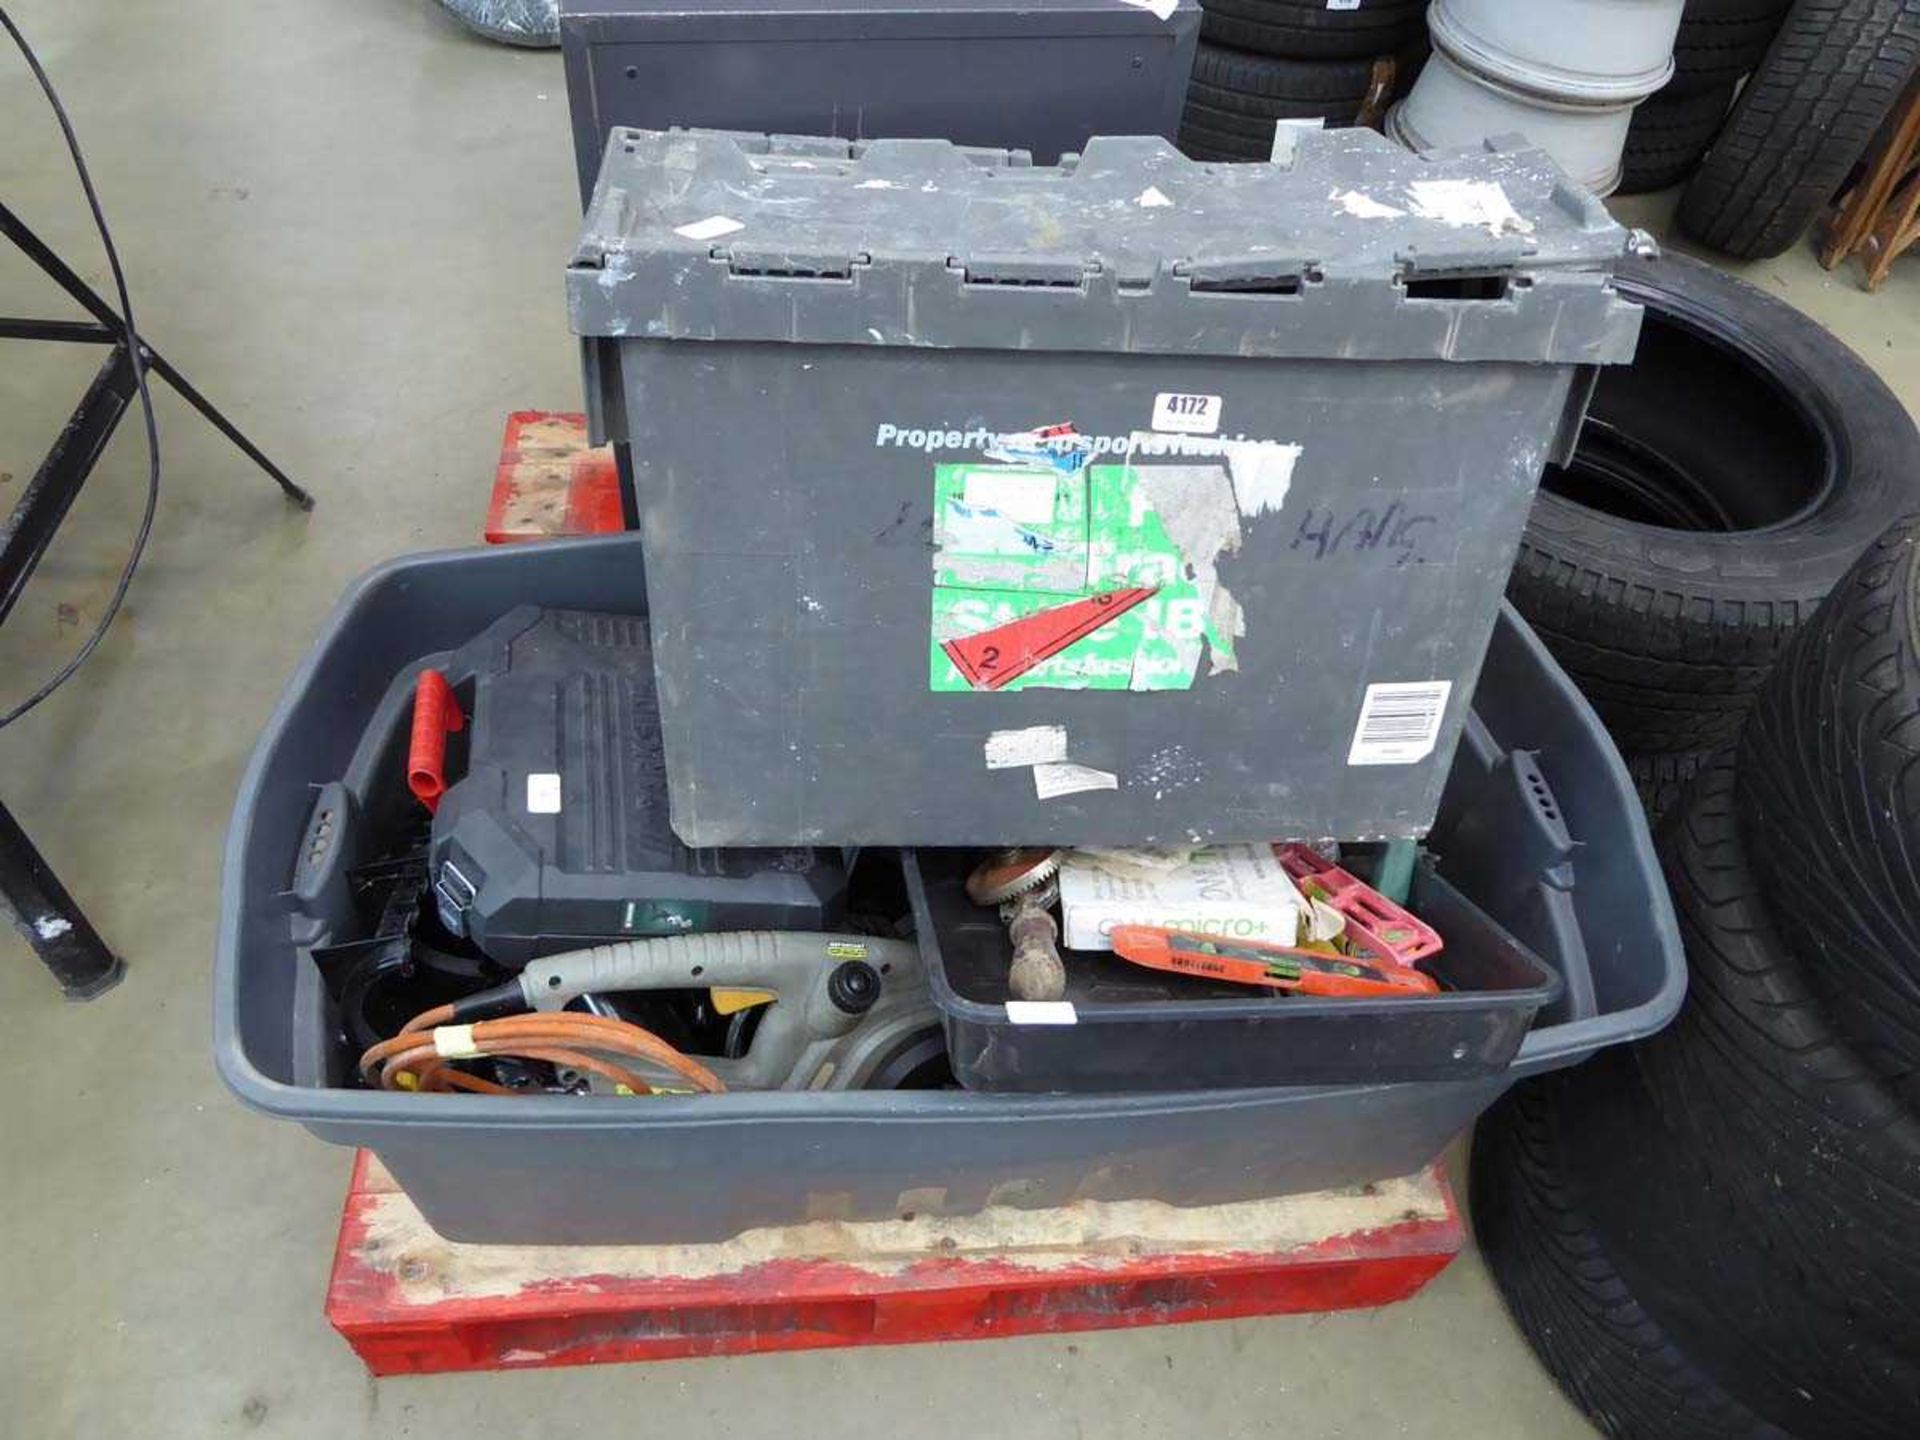 Two large boxes containing various tools, including chainsaw, drills, plumbing fittings, drainpipe